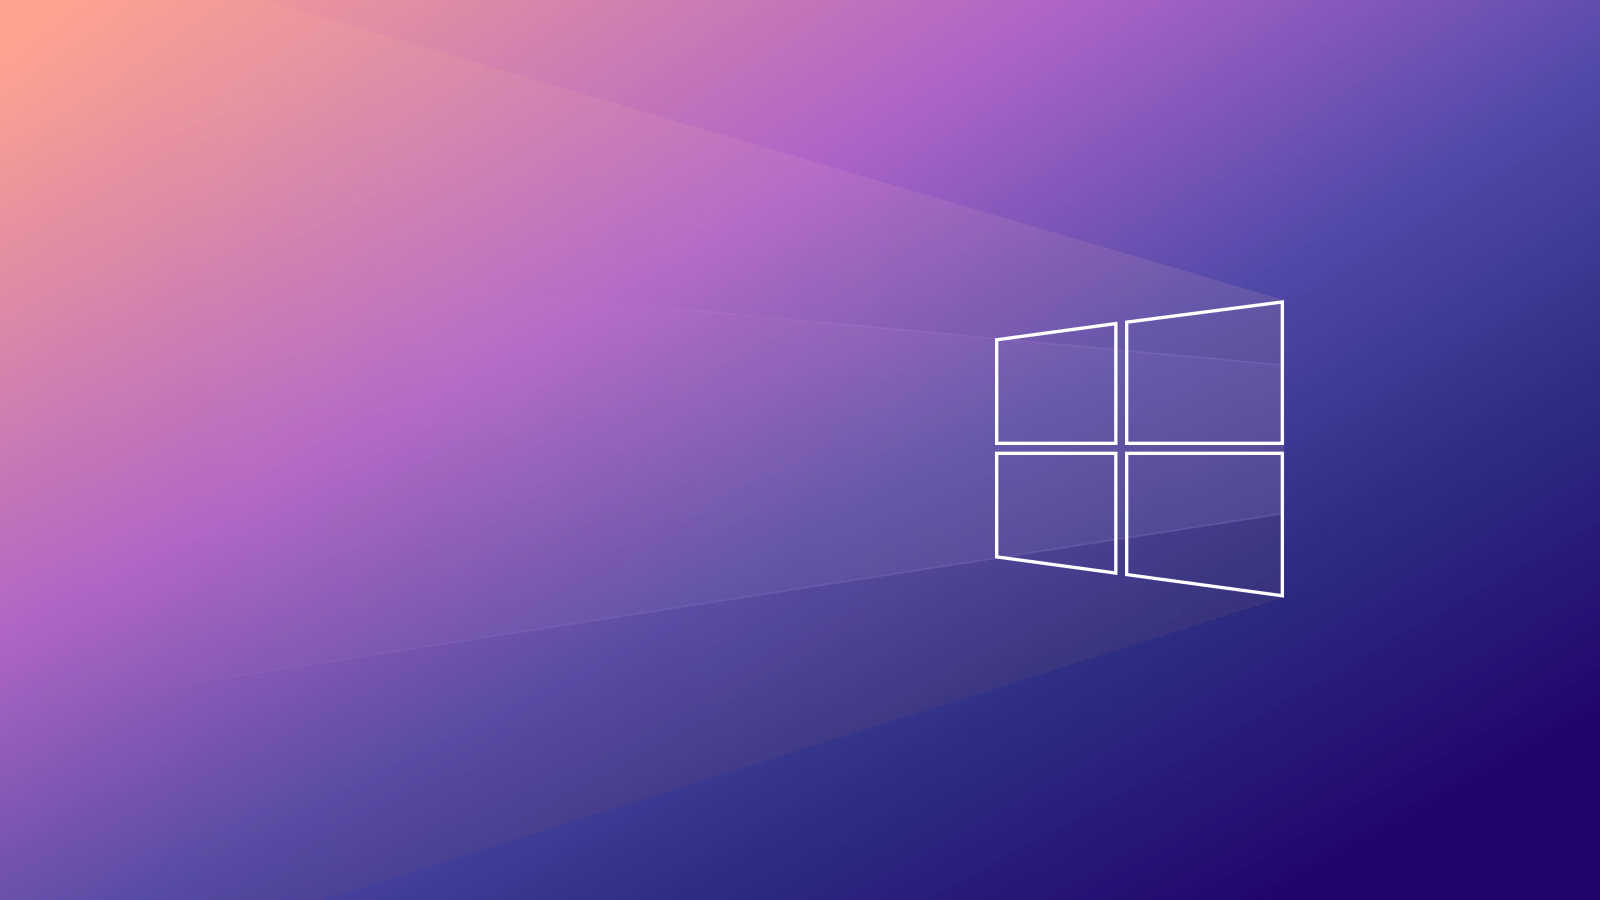 Windows 10 wallpaper with a colorful background - Minimalist